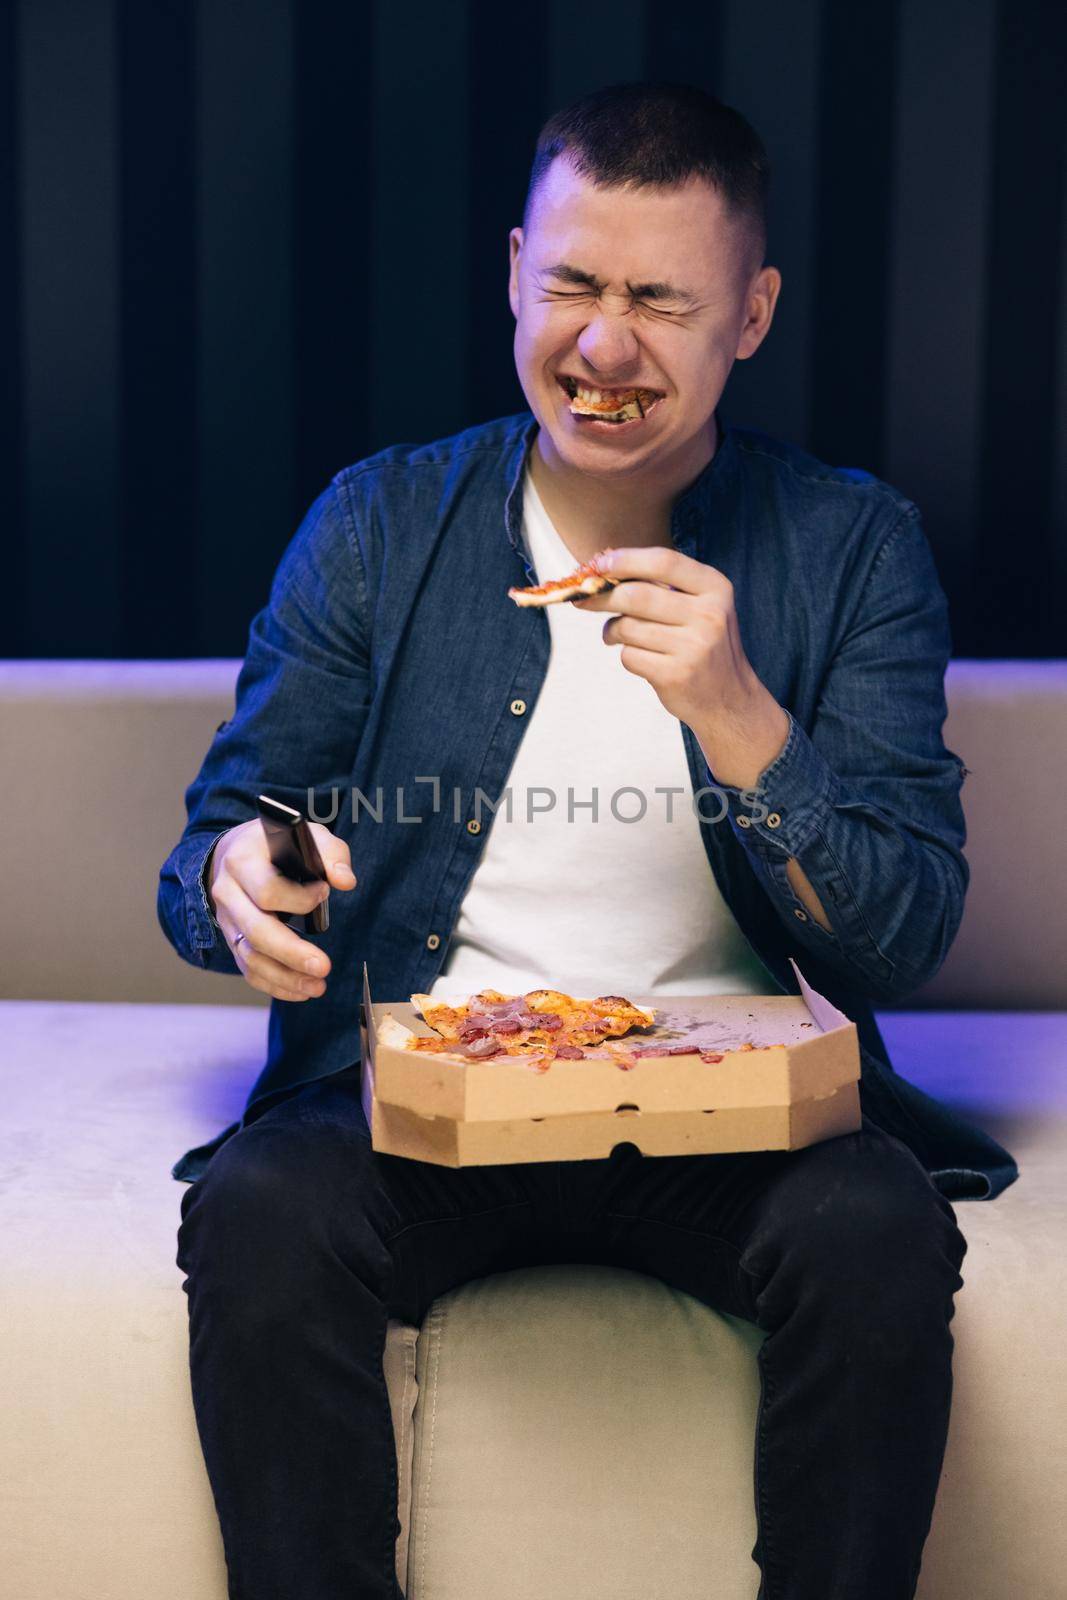 Man eating pizza sitting on sofa smiling at home. Relaxation resting. Funny young emotional caucasian fan man watching a game, eating pizza and reacting to team playing.